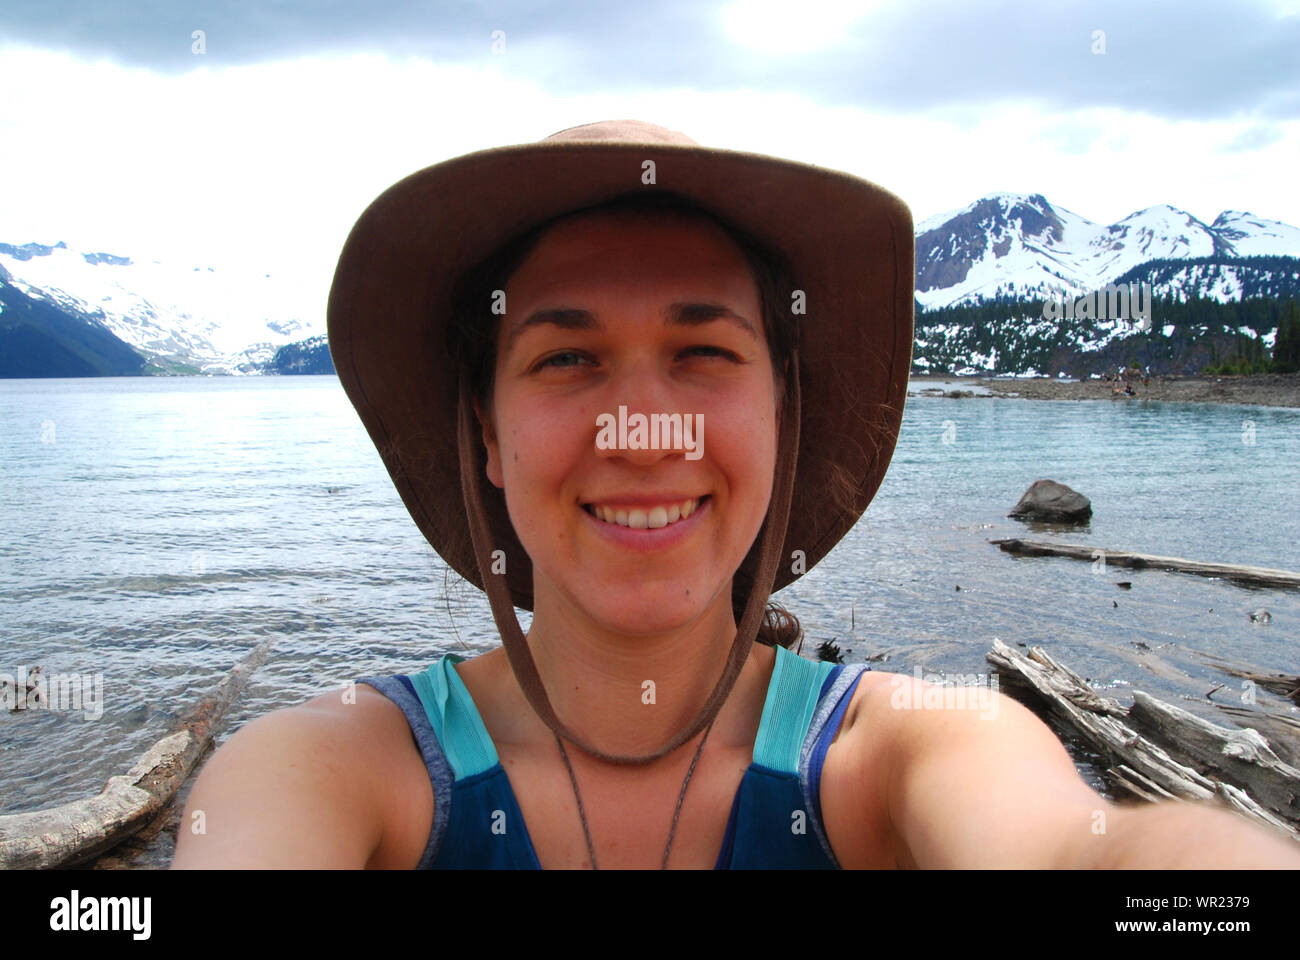 Authentic happy young natural Caucasian woman with a hat adventuring at Garibaldi Lake, taking a selfie in the Canadian glacier landscape Stock Photo